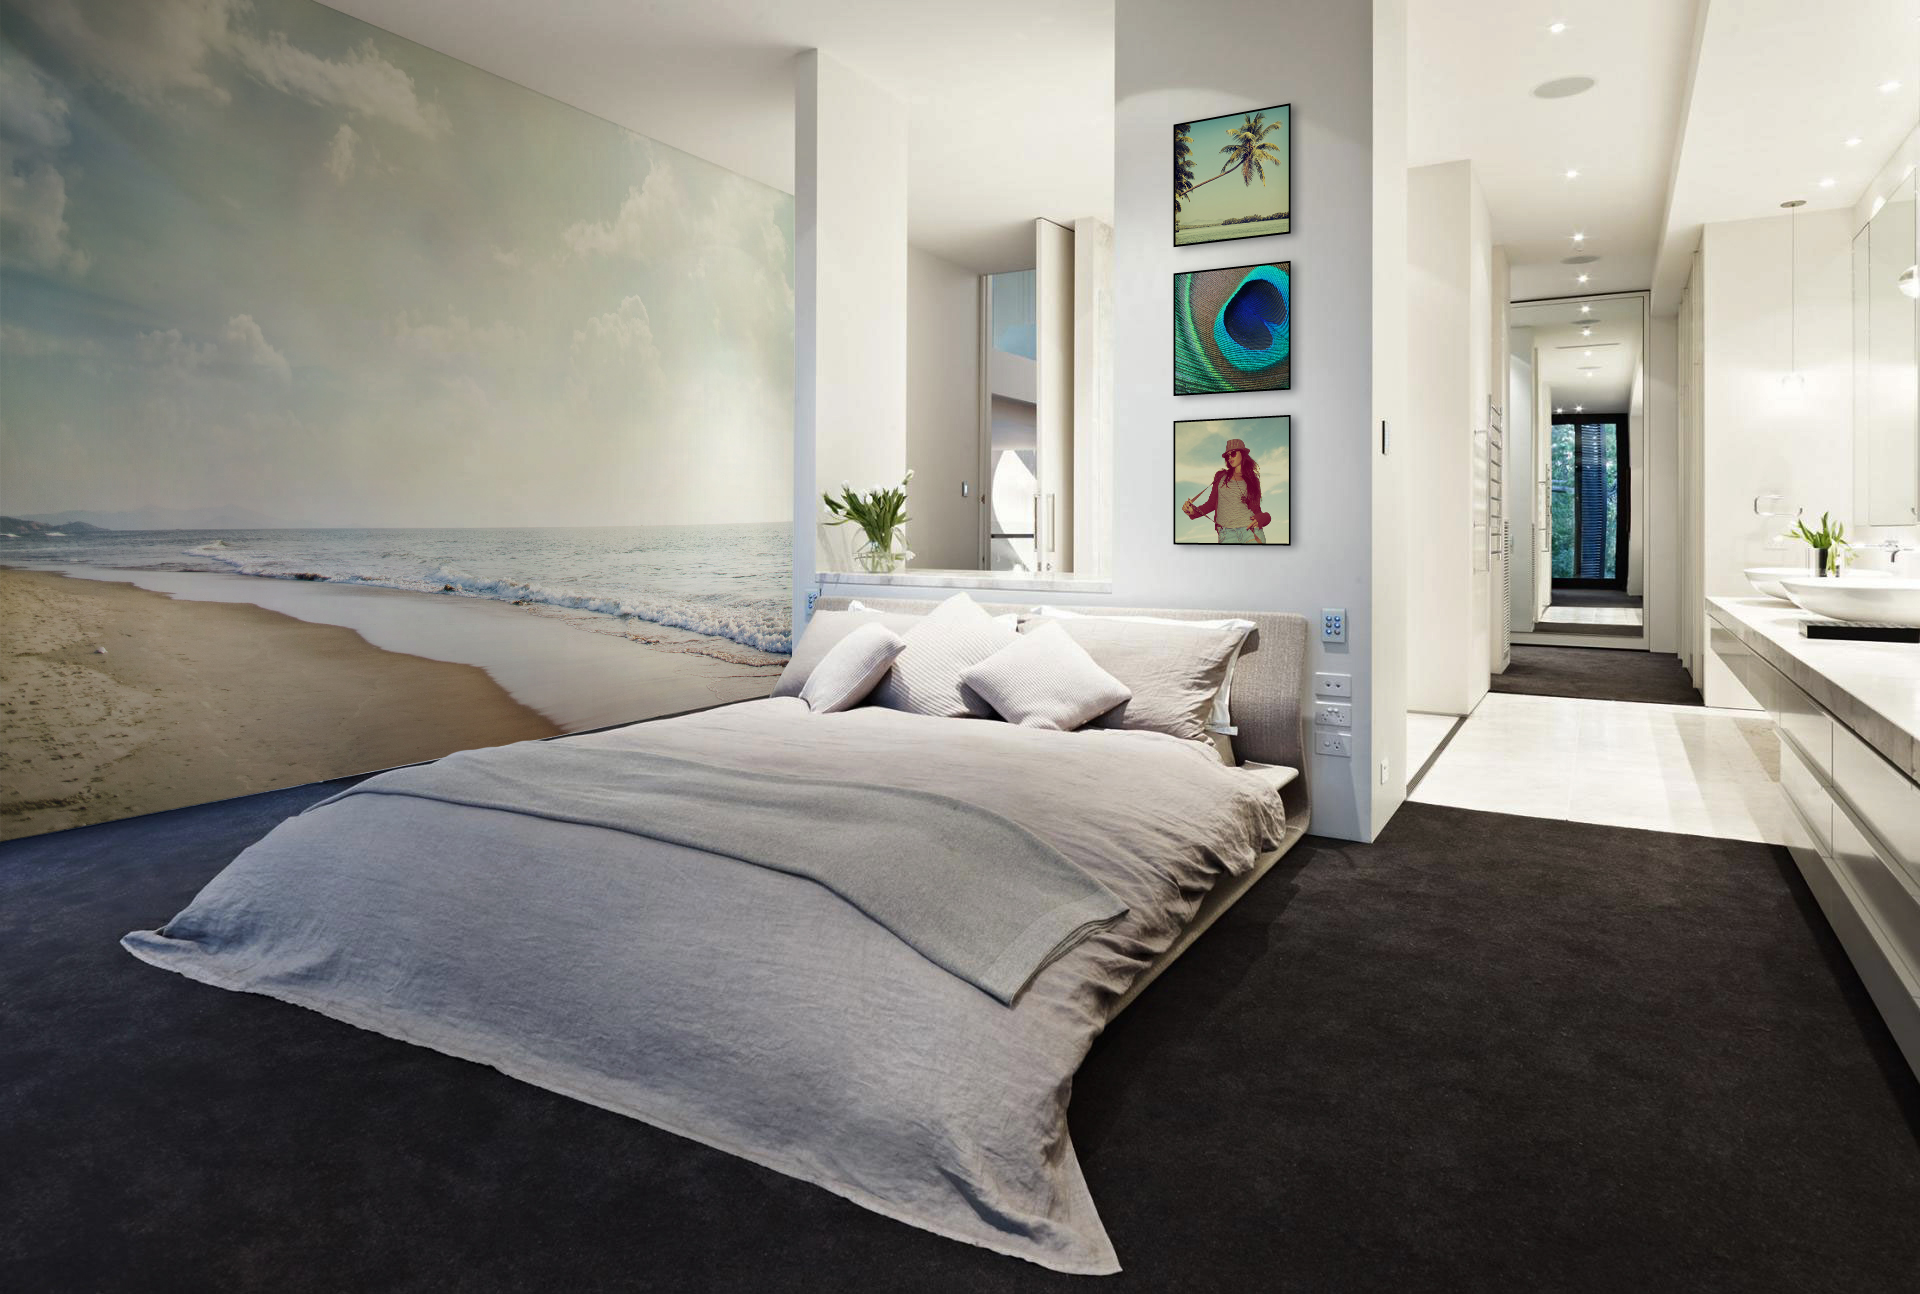 Coastal memories • Bedroom - Contemporary - Wall Murals - Posters - People - Nature - Flowers and plants - Landscapes